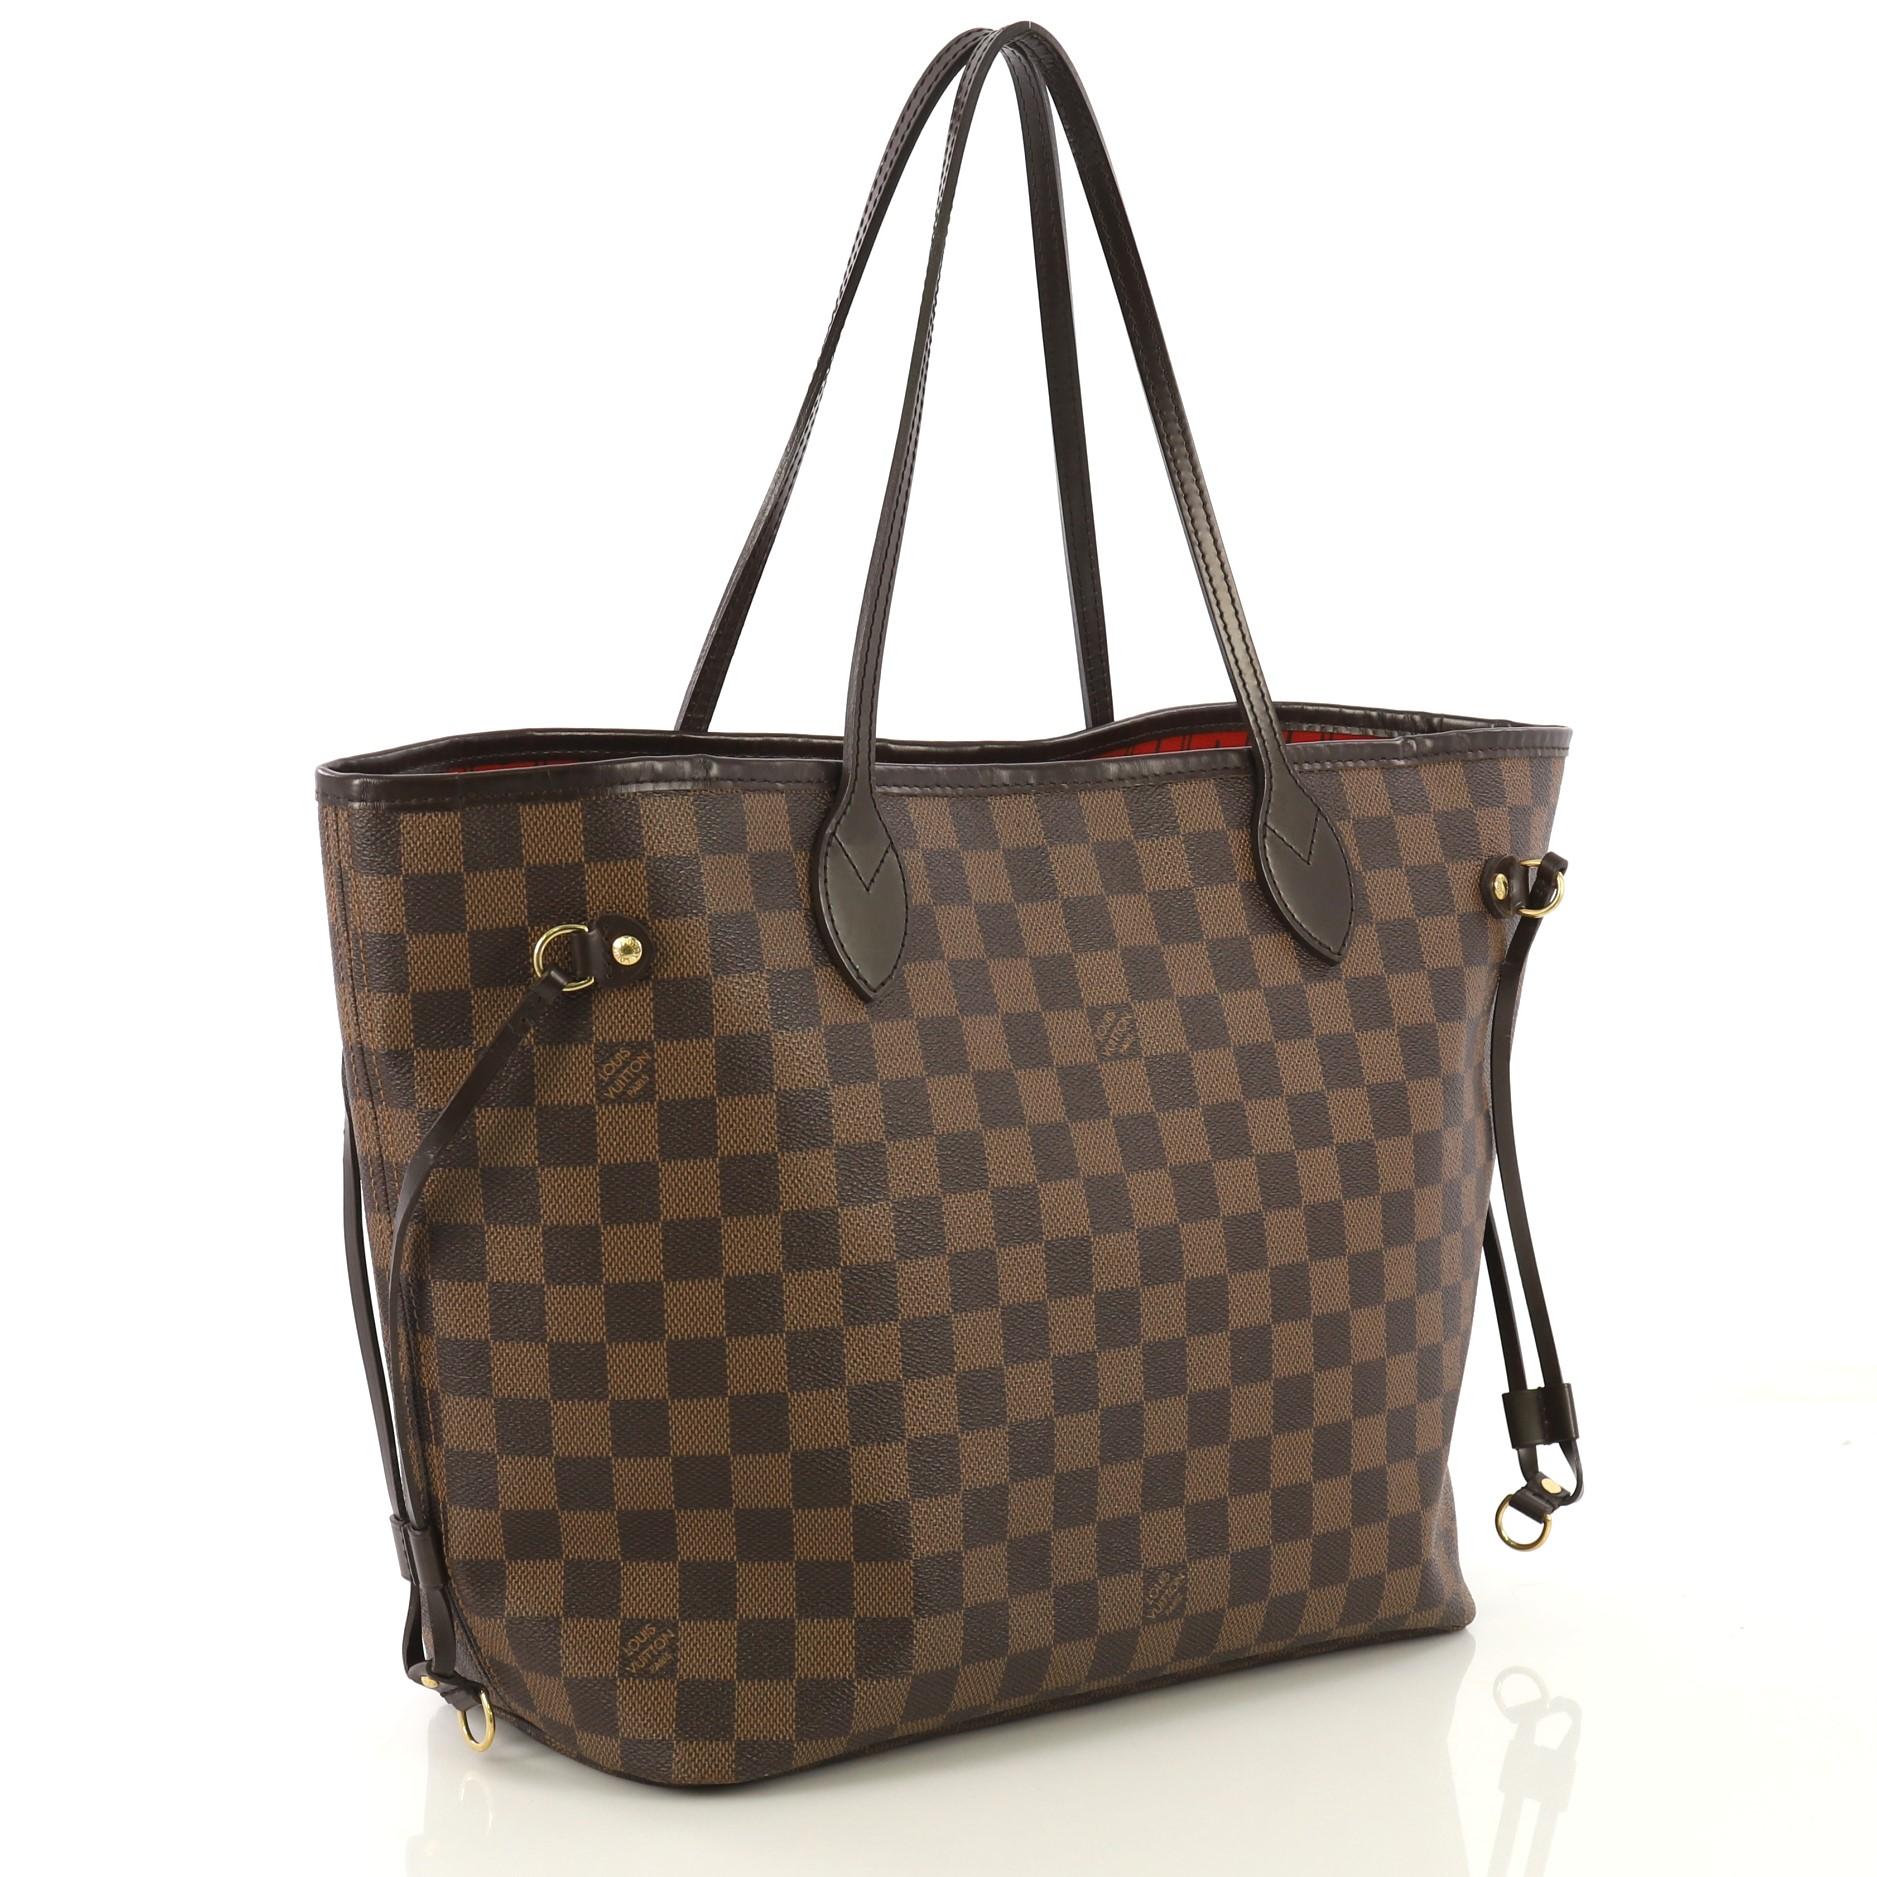 This Louis Vuitton Neverfull Tote Damier MM, crafted in damier ebene coated canvas, features dual slim handles, side laces, and aged gold-tone hardware. Its wide open top showcases a red fabric interior with side zip pocket. Authenticity code reads: